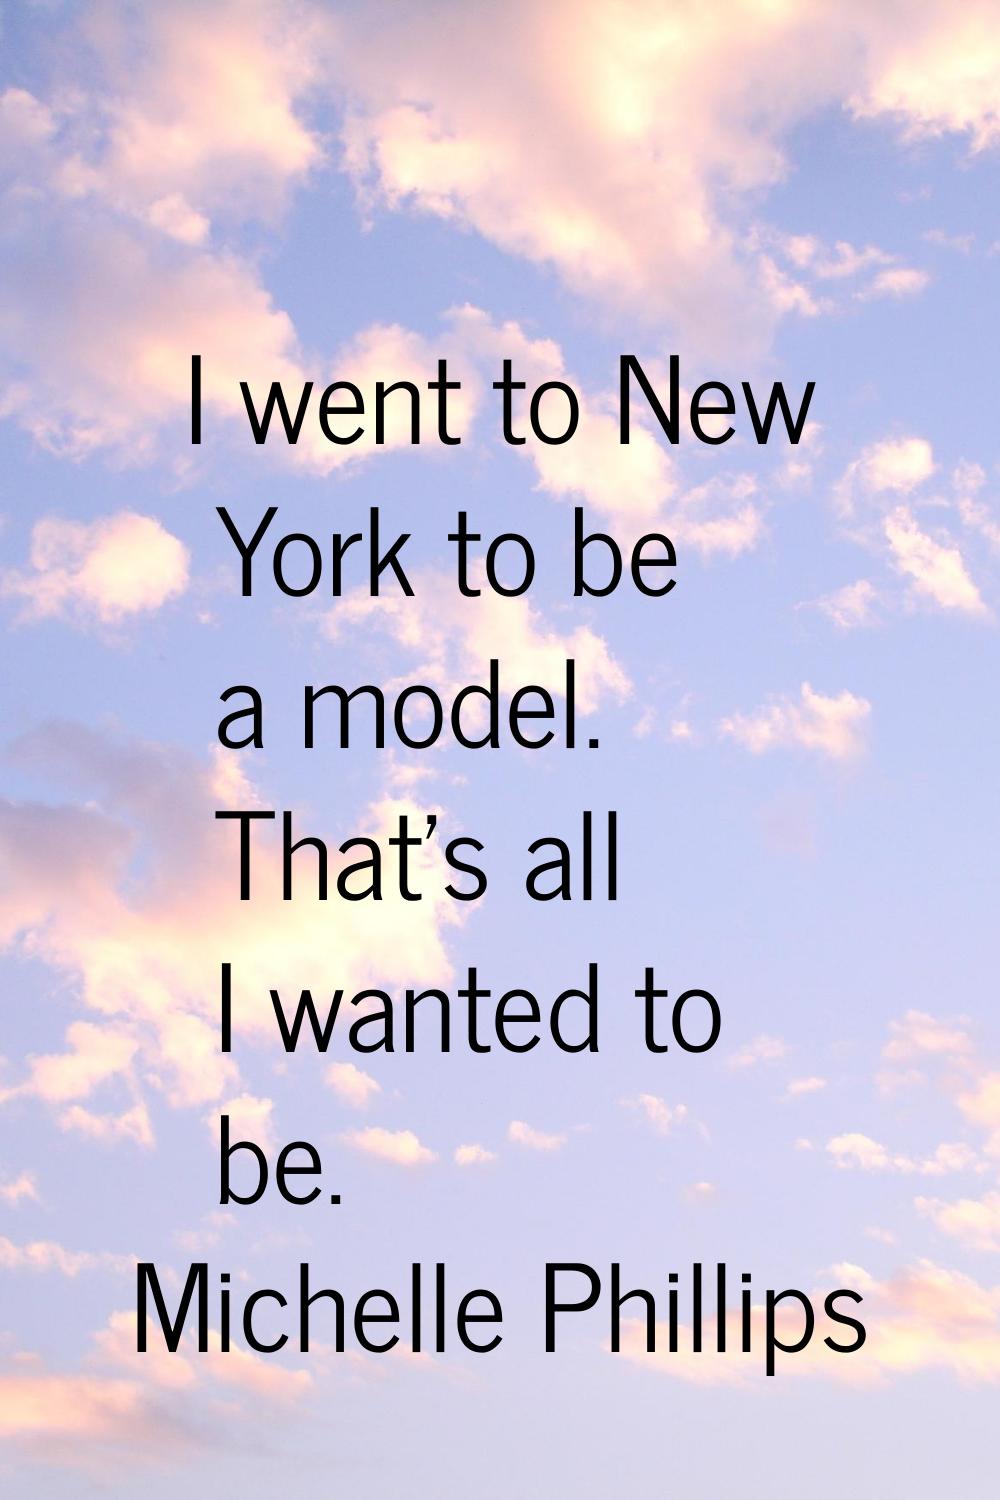 I went to New York to be a model. That's all I wanted to be.